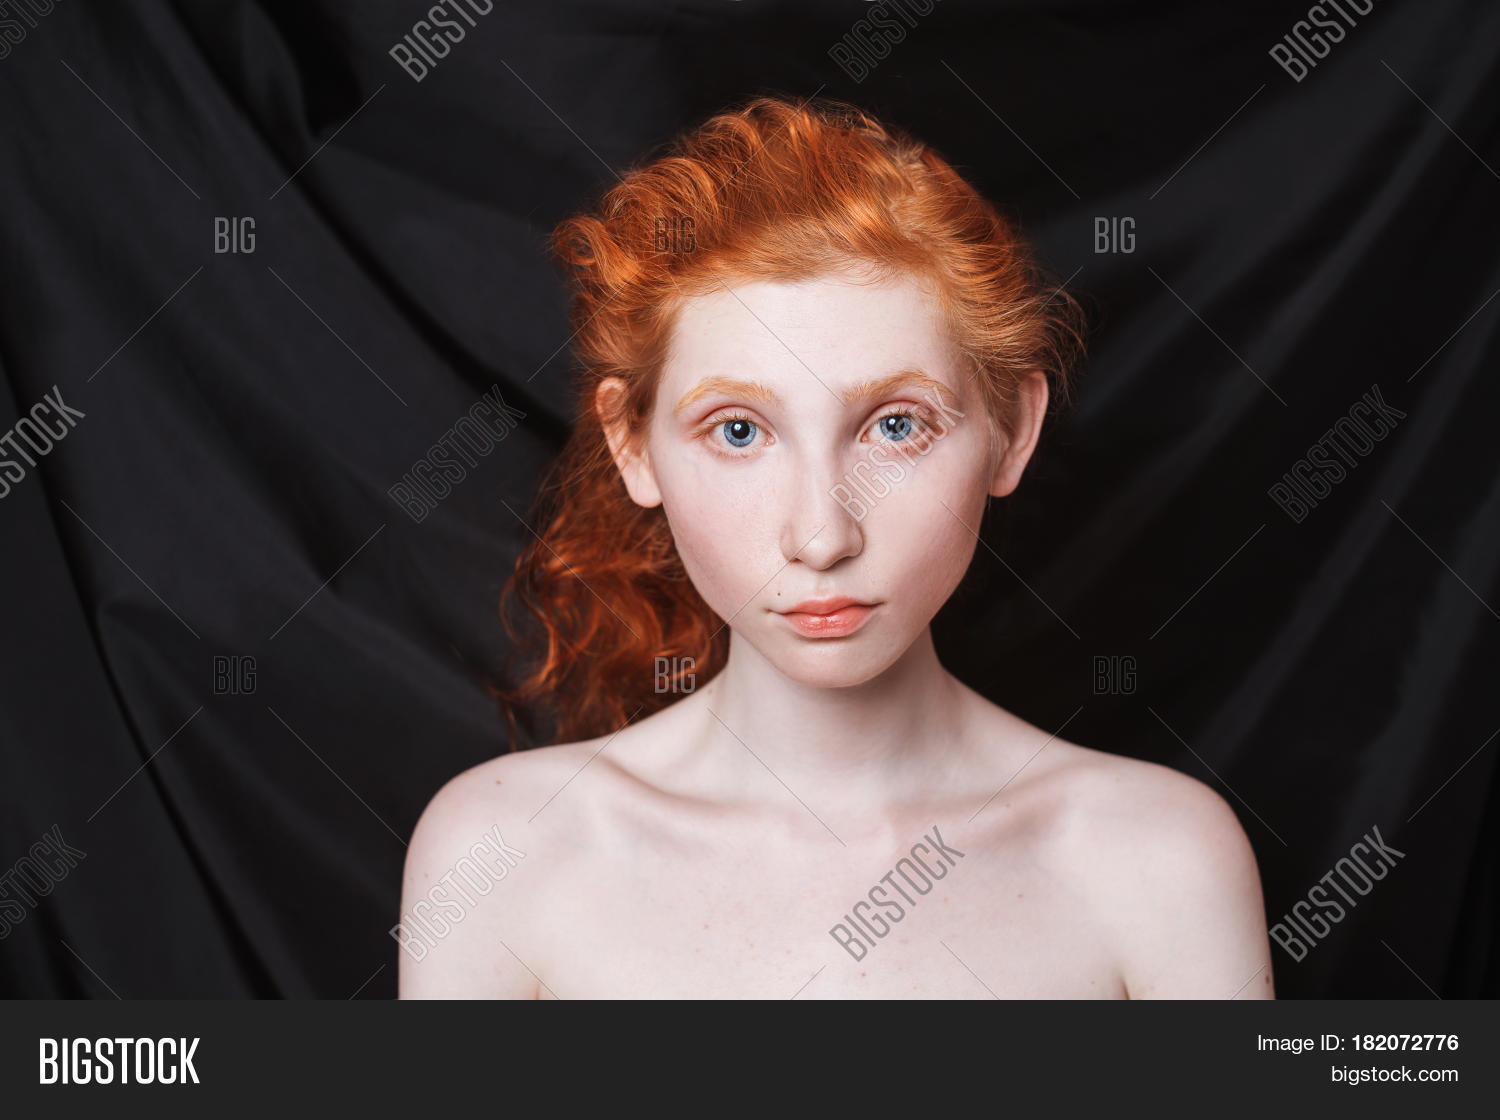 Makeup For Blue Eyes Red Hair Woman Long Curly Red Image Photo Free Trial Bigstock